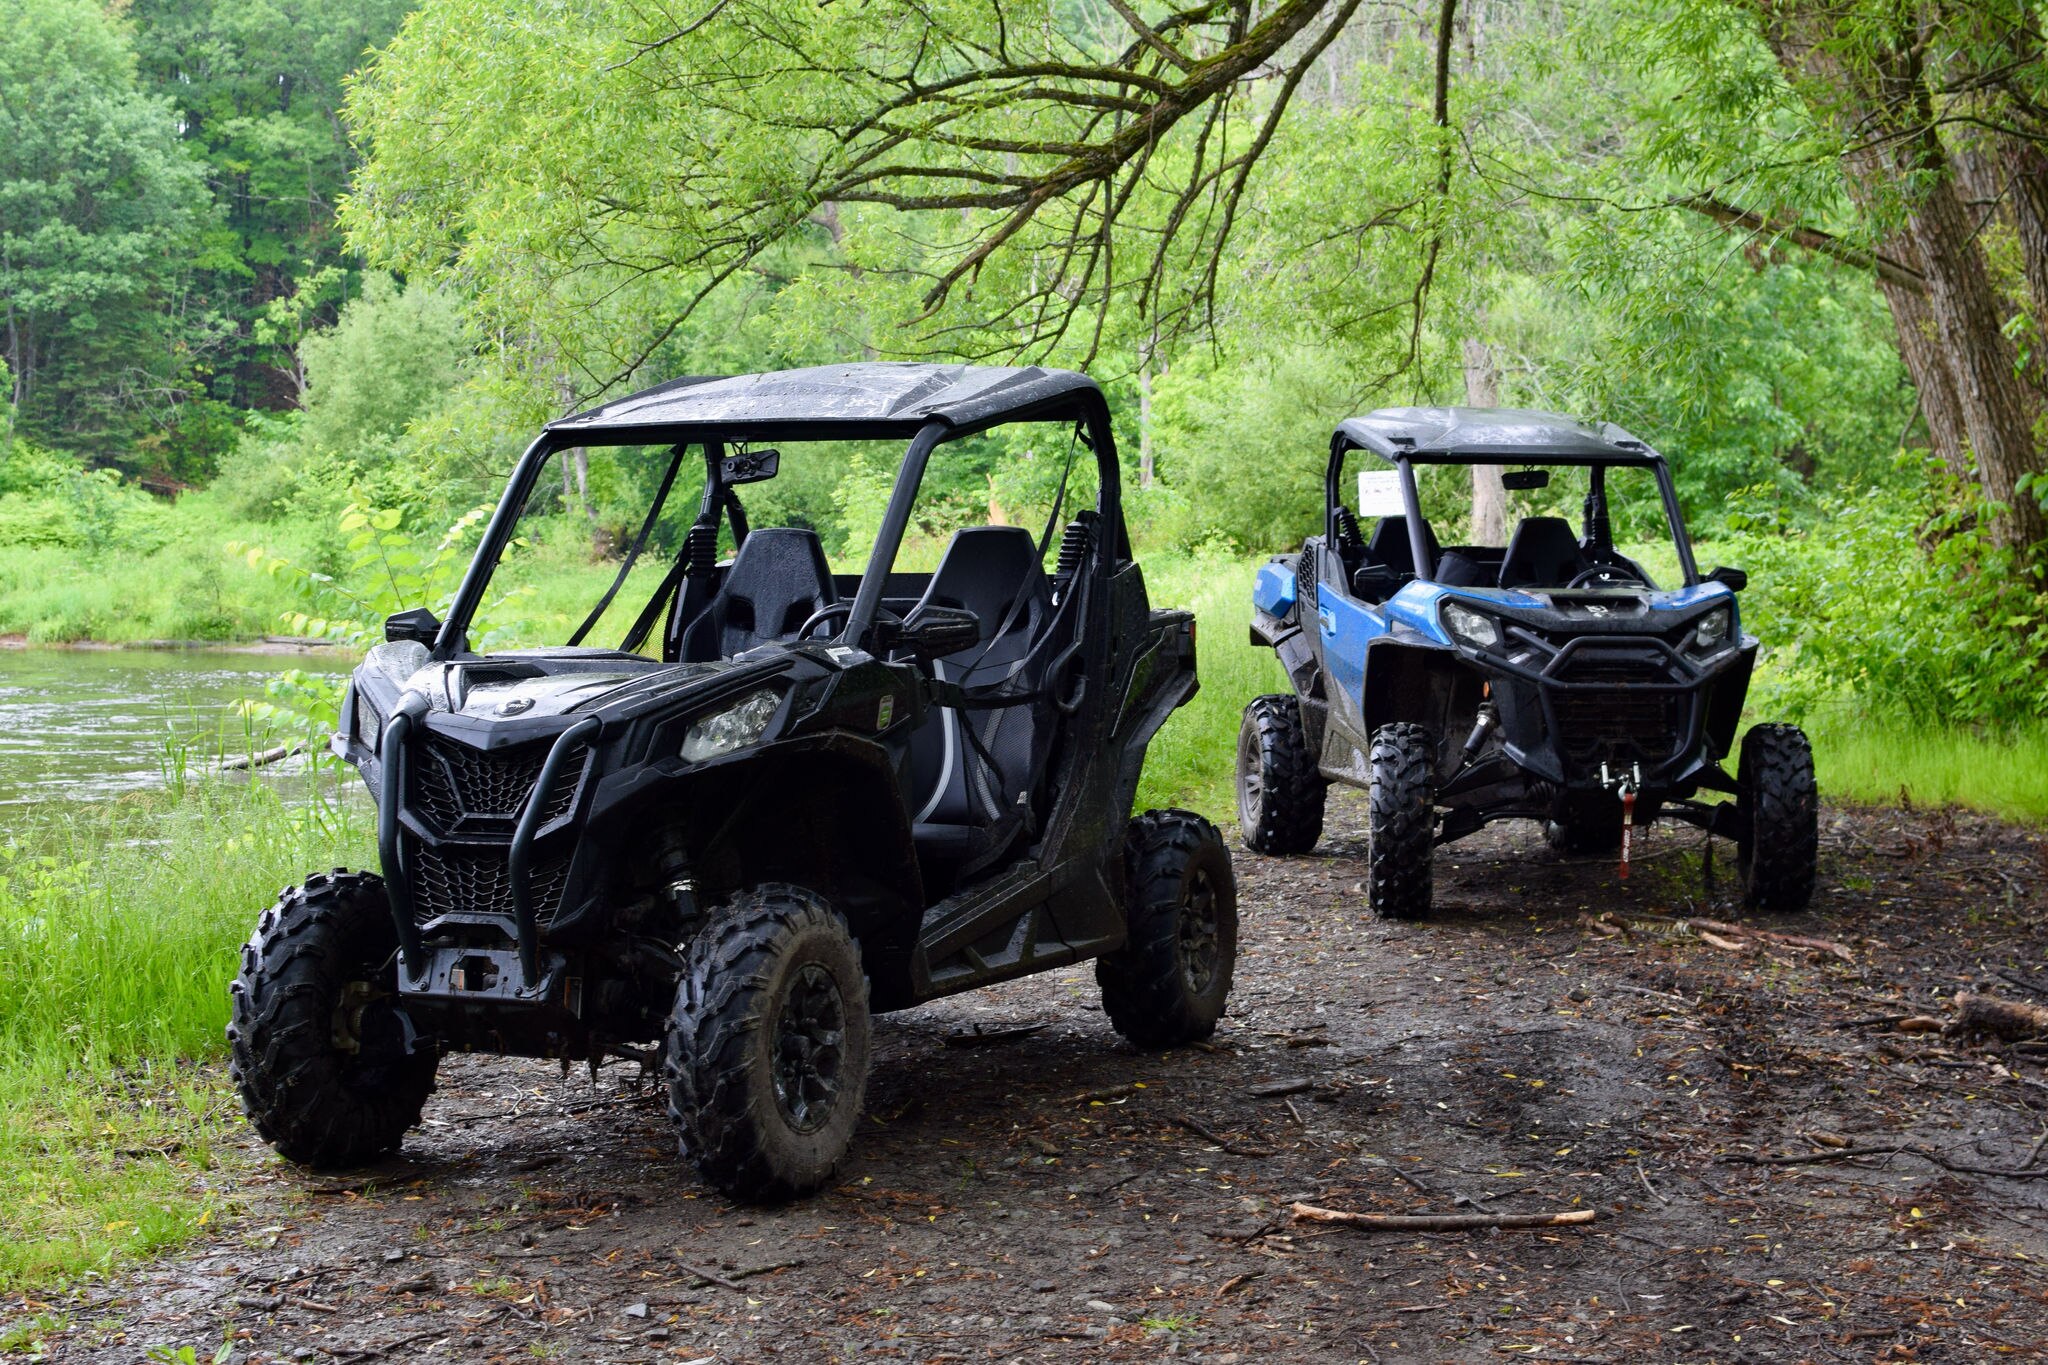 Two Can-Am Side-by-Sides parked on dirt, next to flowing water, under trees